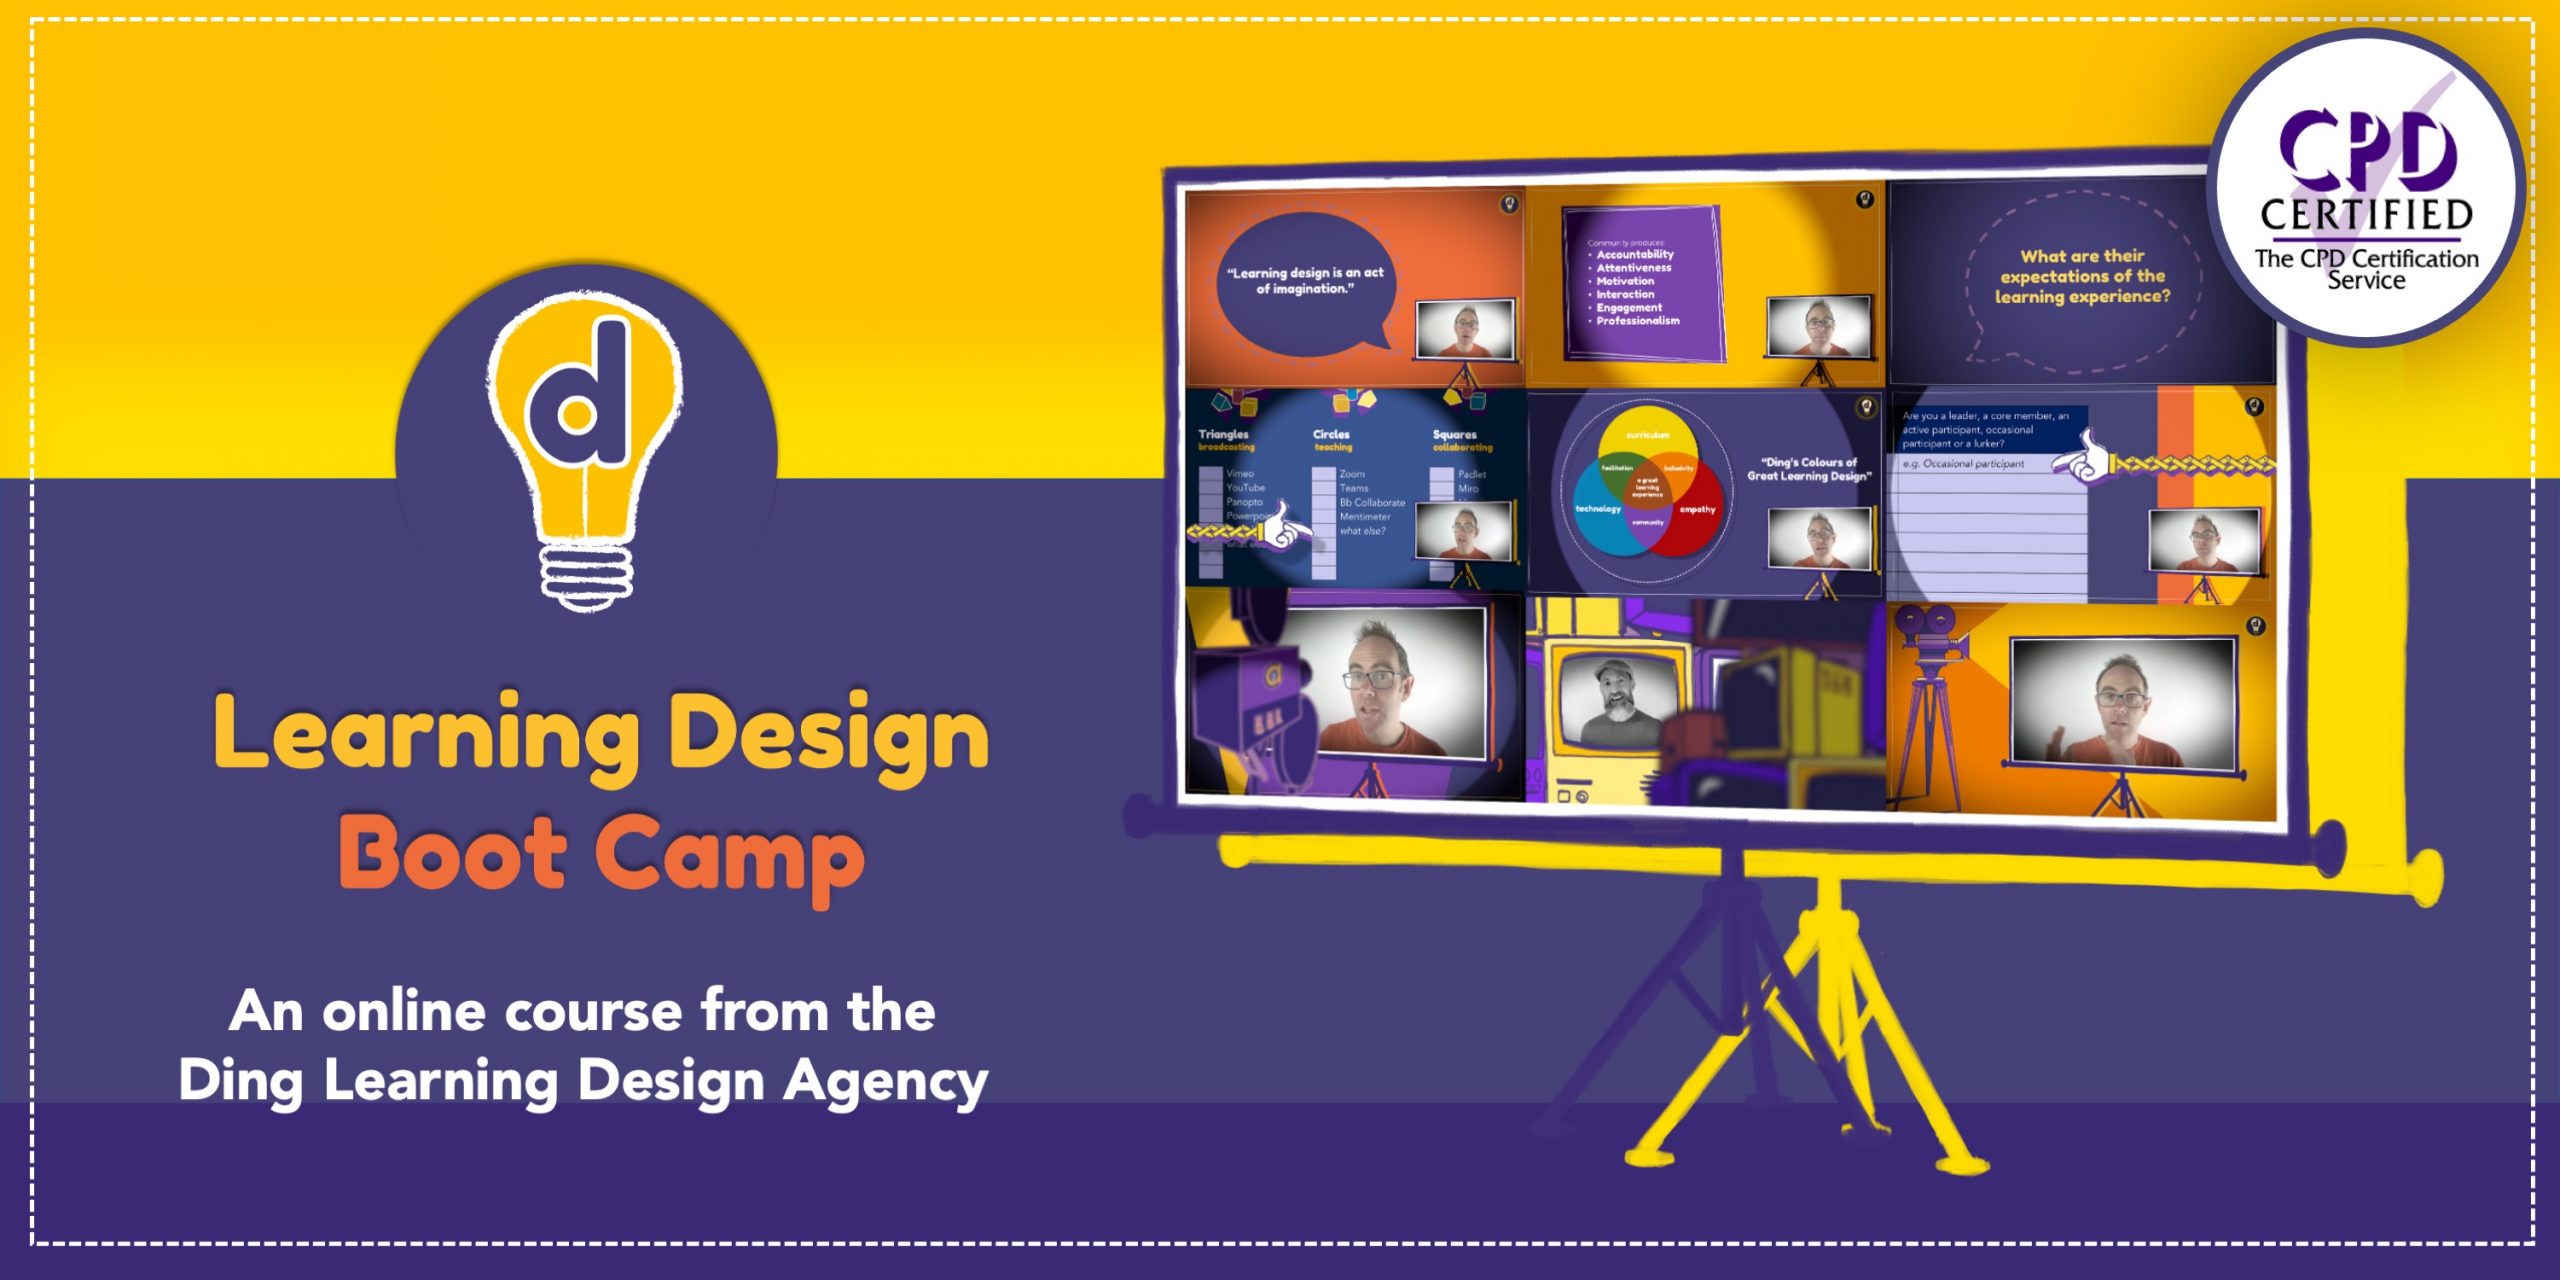 Front Page of Ding's Learning Design Bootcamp brochure